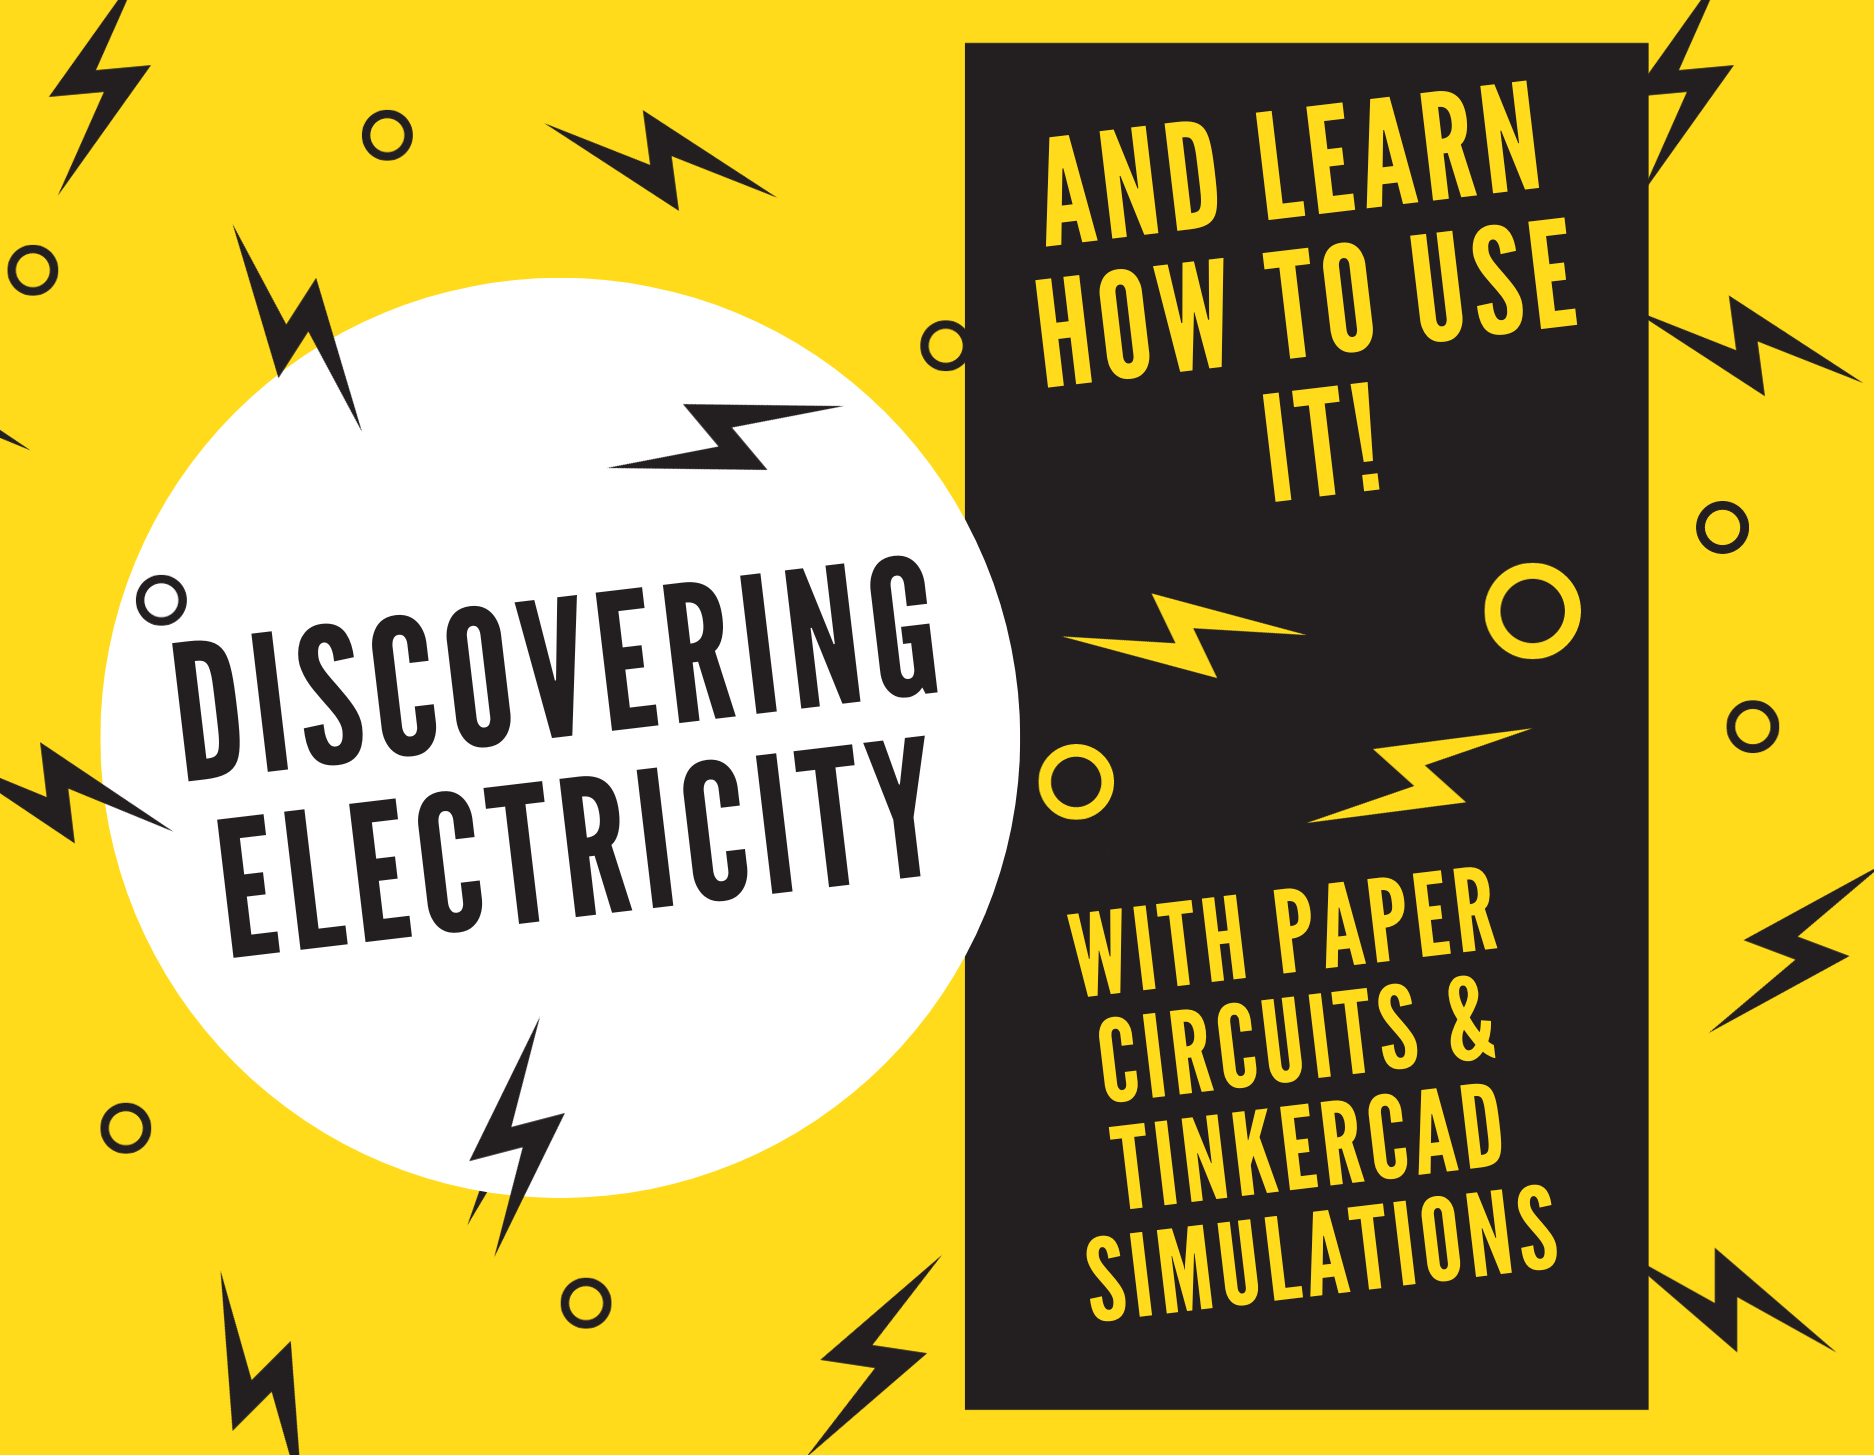 Discovering Electricity With Paper Circuits and Tinkercad Simulations